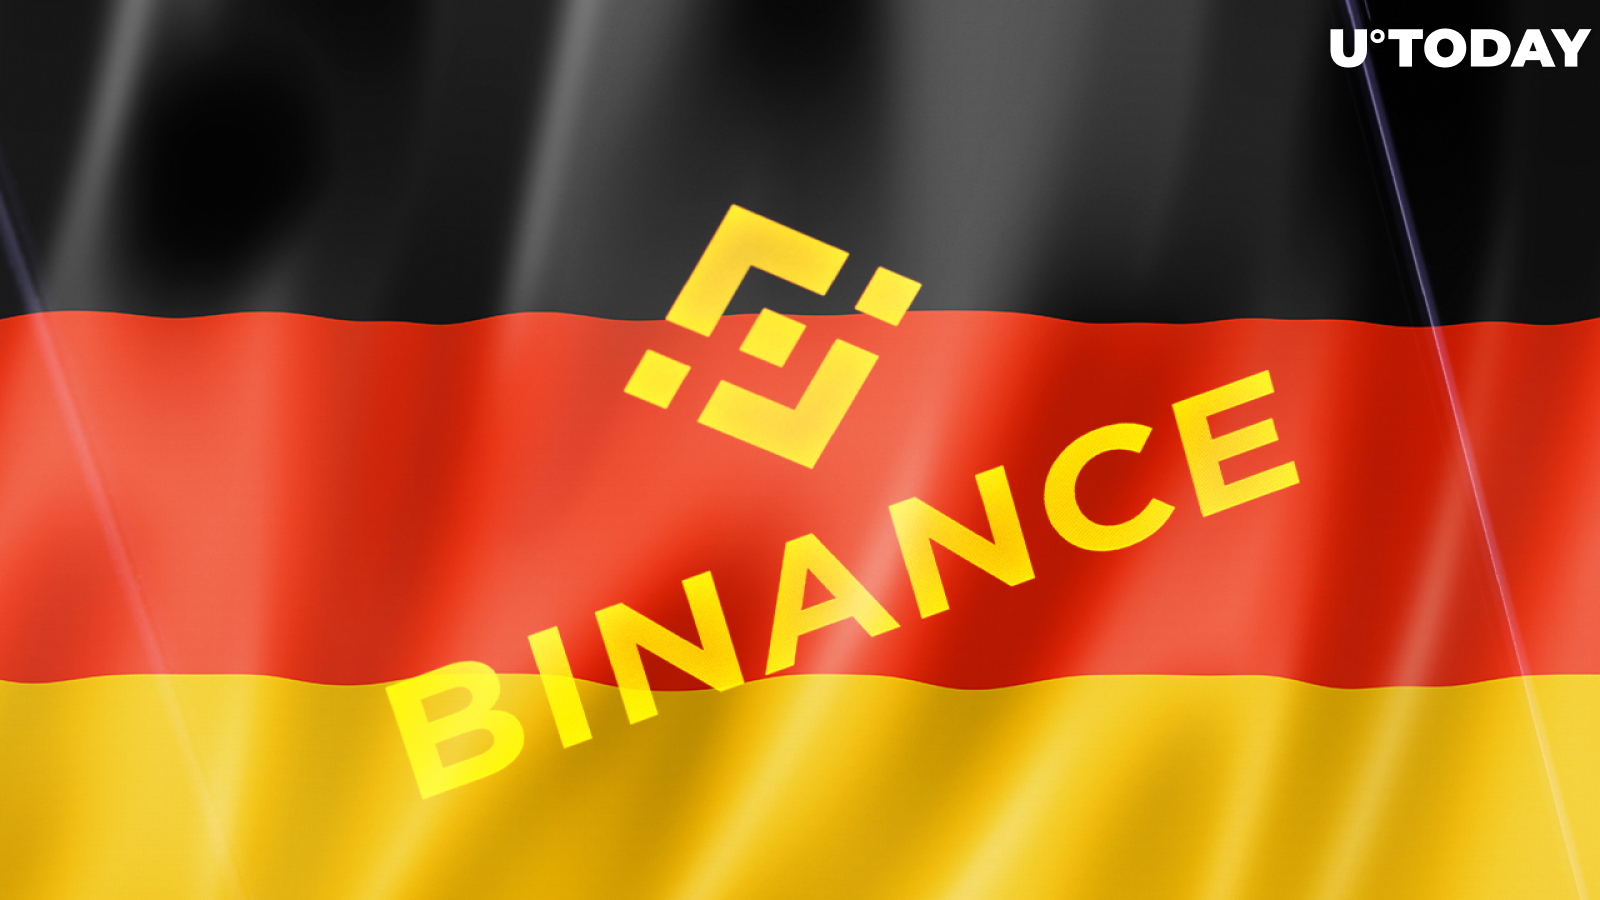 Binance Is Actively Applying for Licenses in Germany